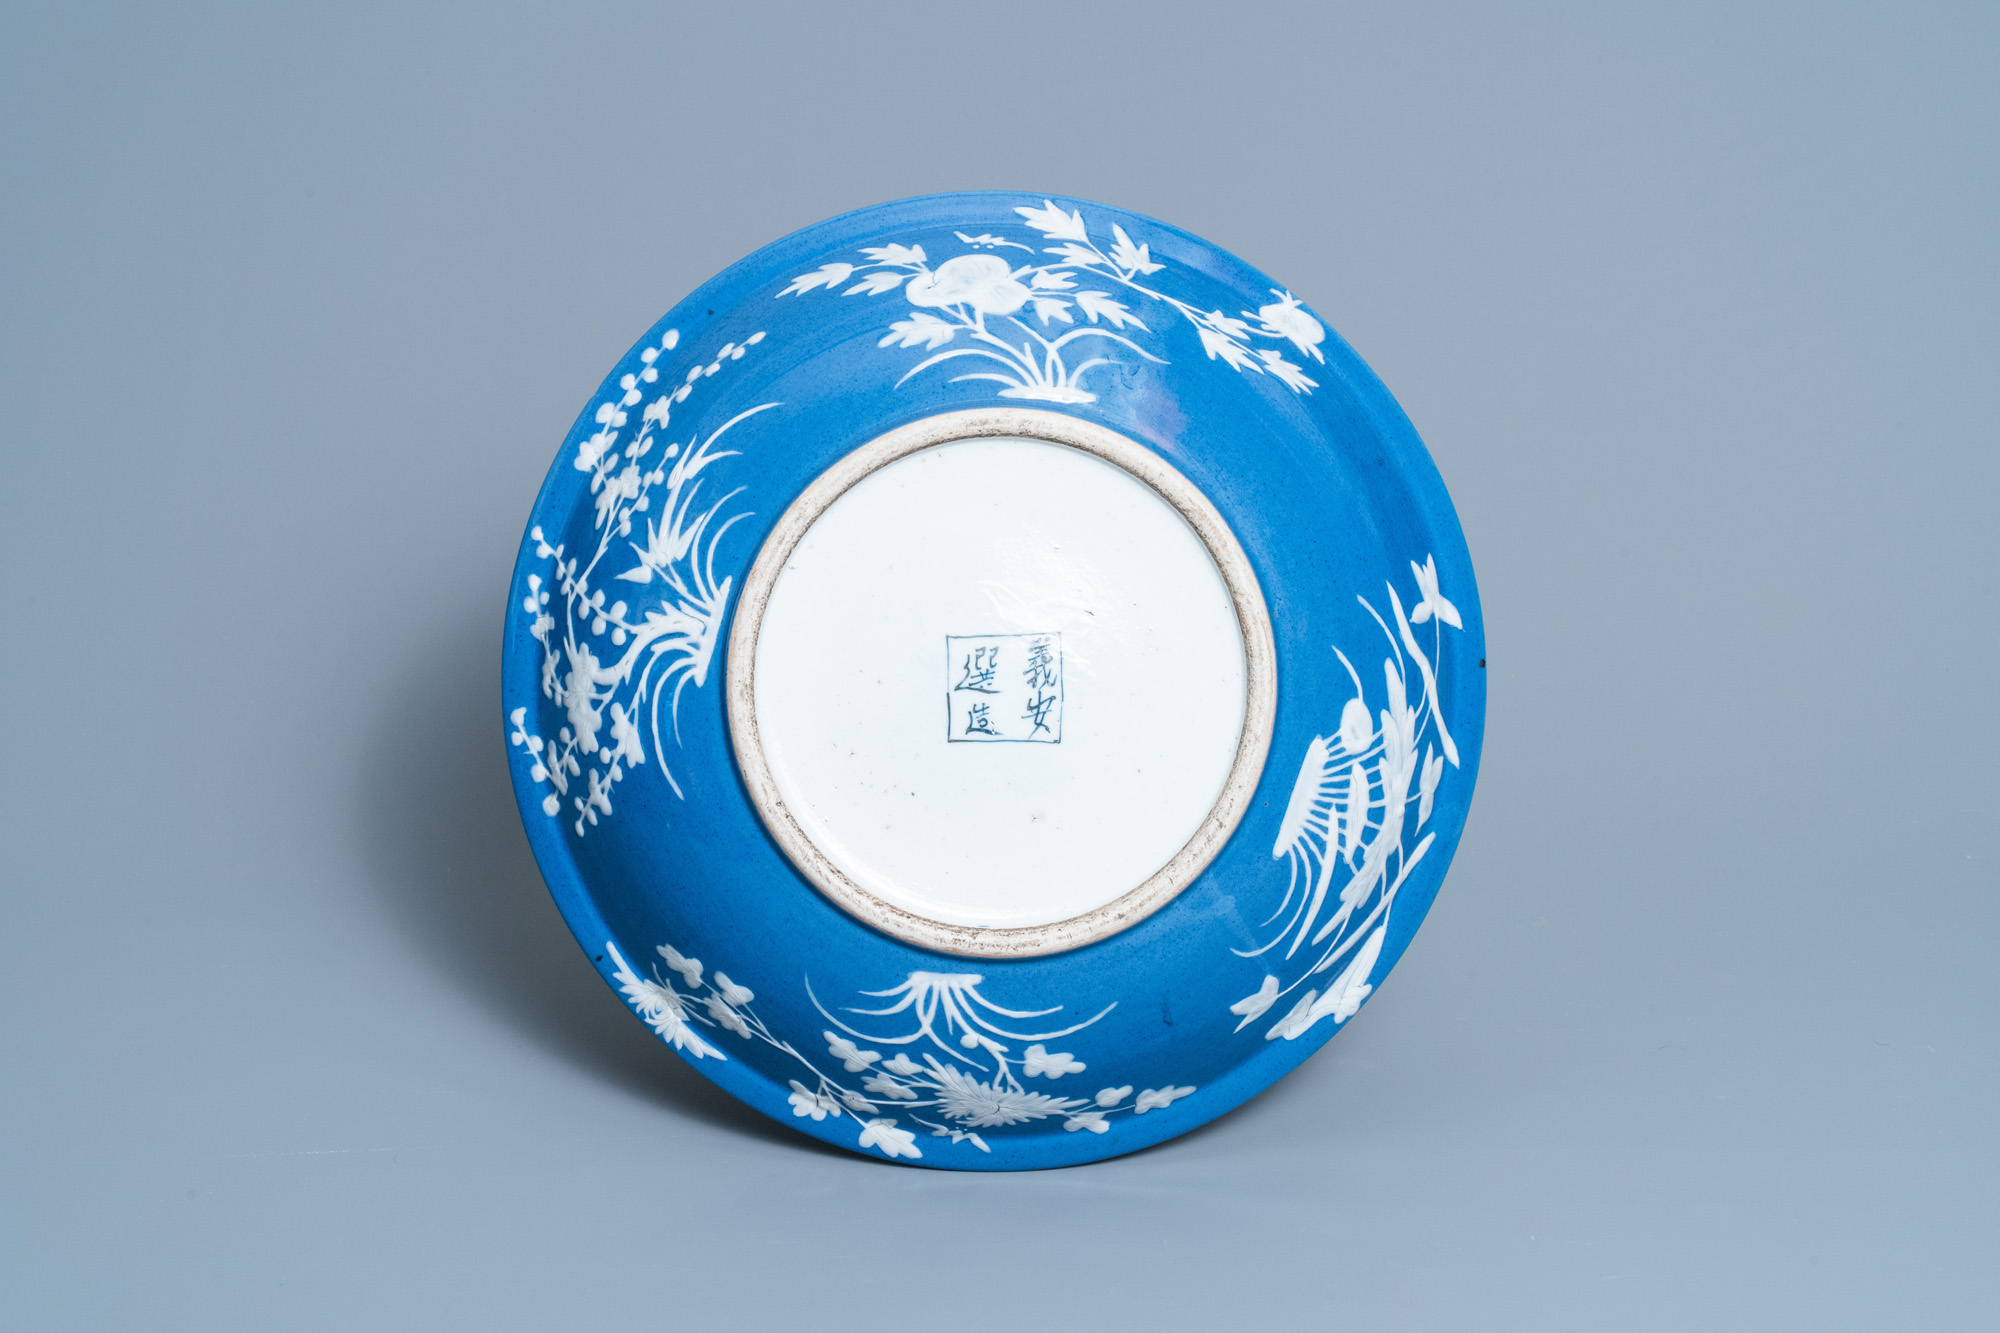 A varied collection of Chinese porcelain, 19/20th C. - Image 3 of 11